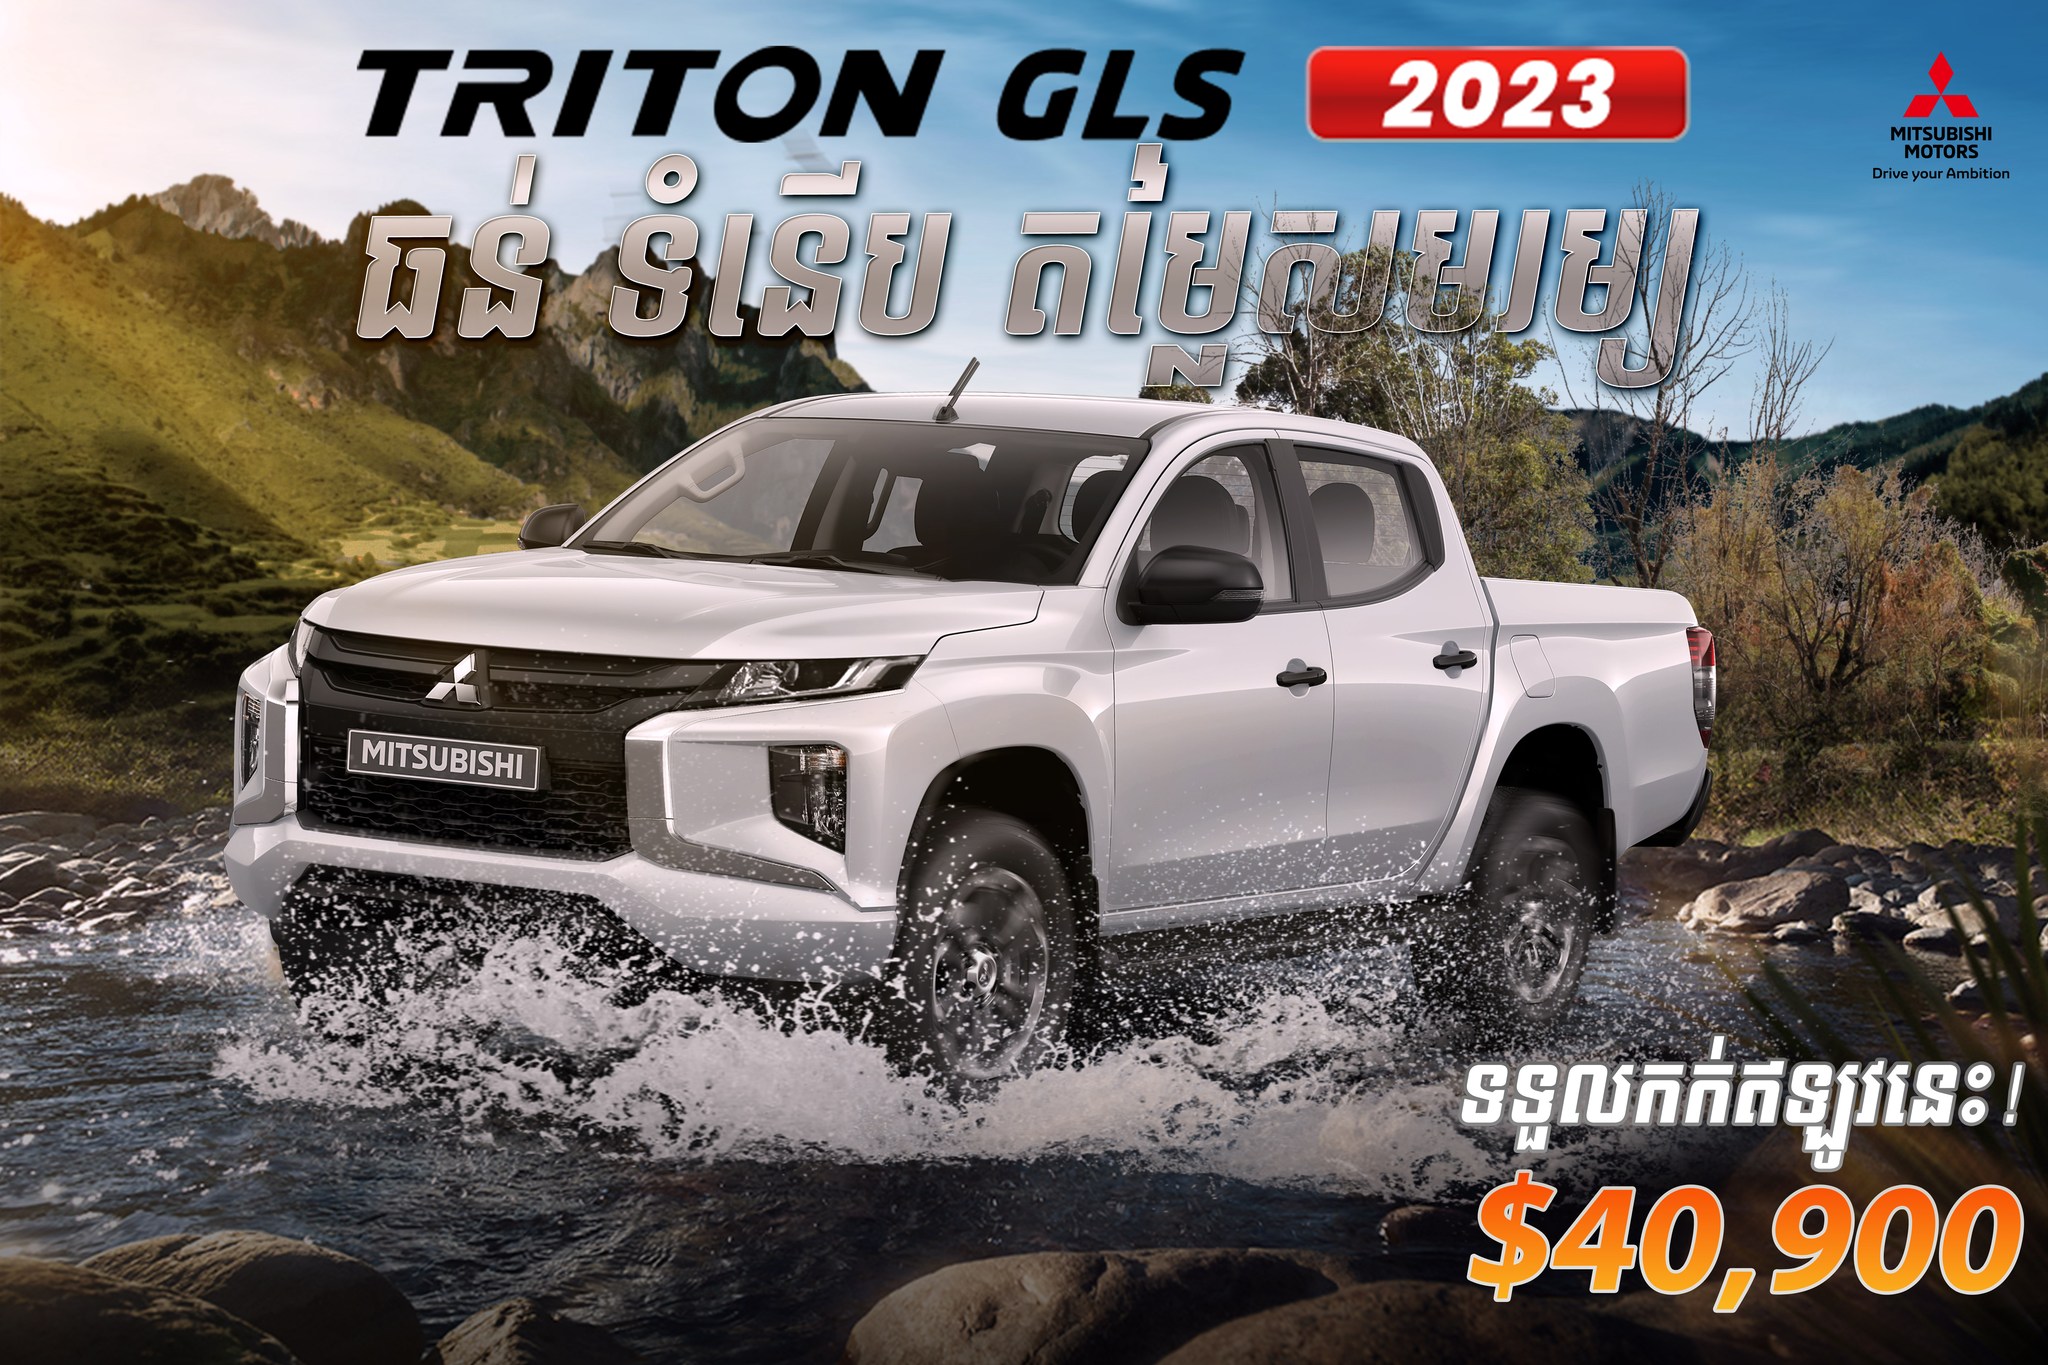 Triton GLS 2023 is now open for pre-order!